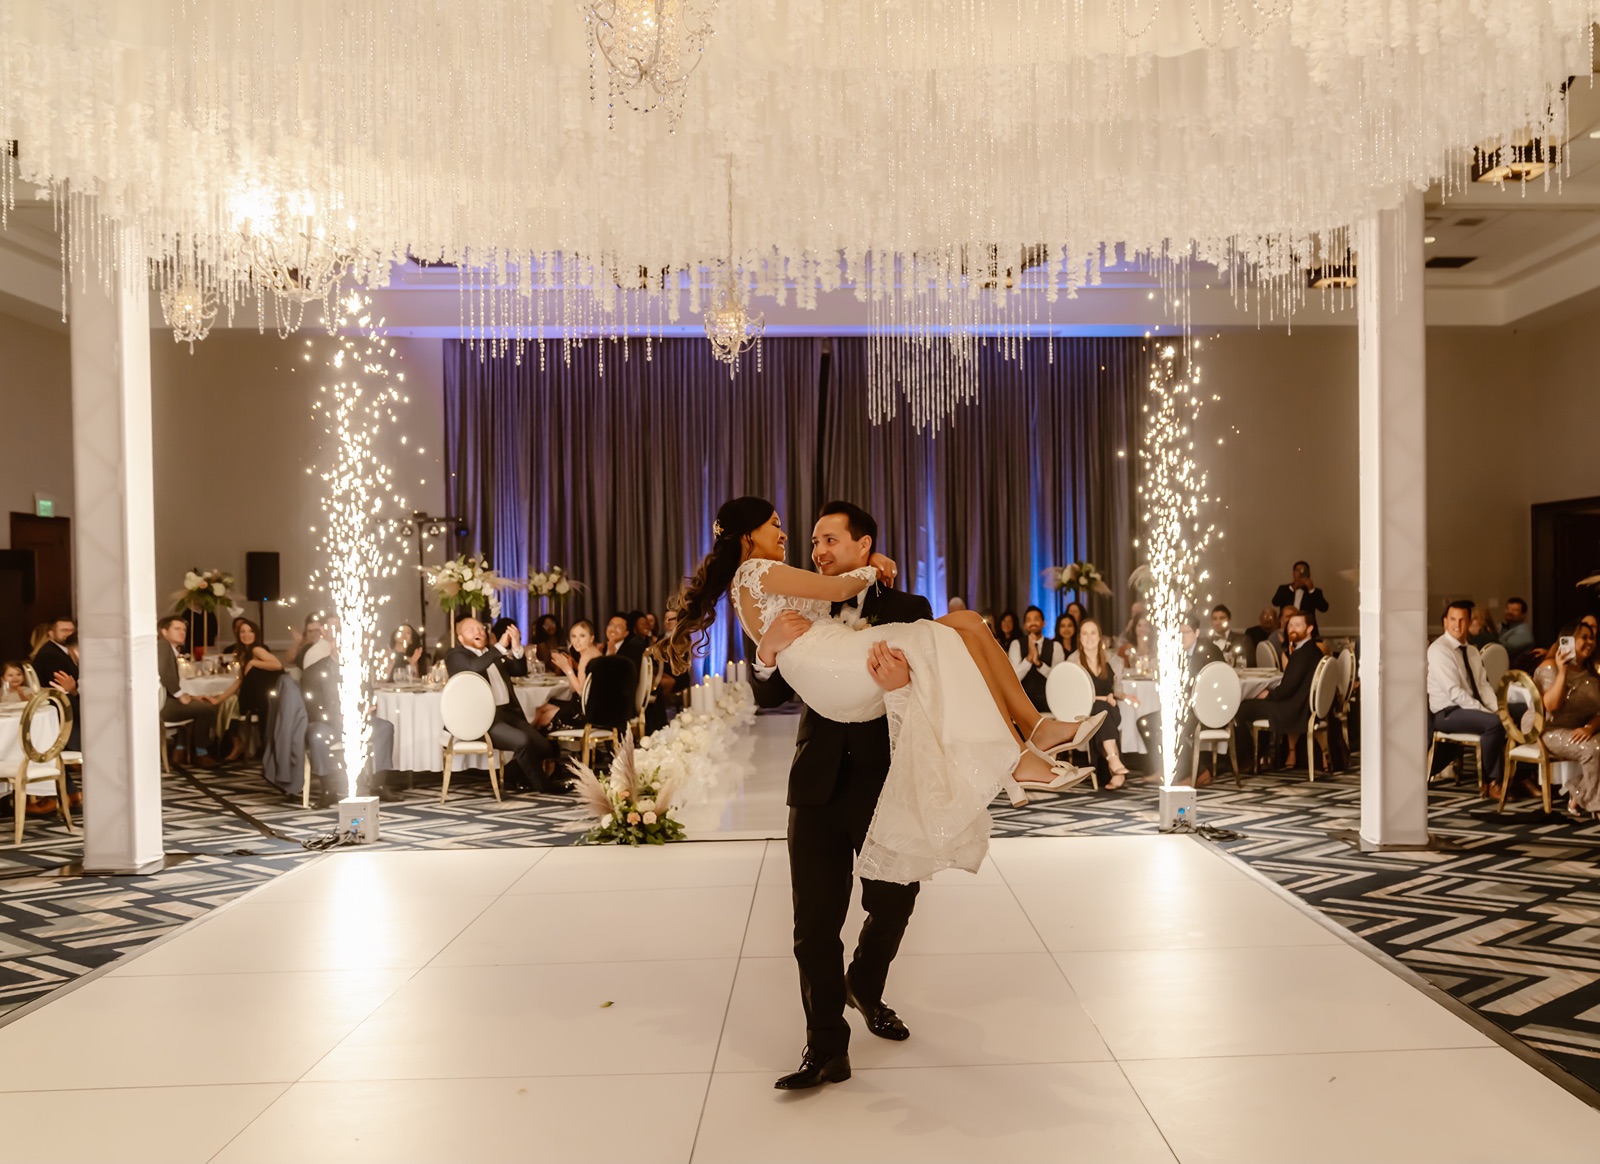 Groom picks up bride during their first dance